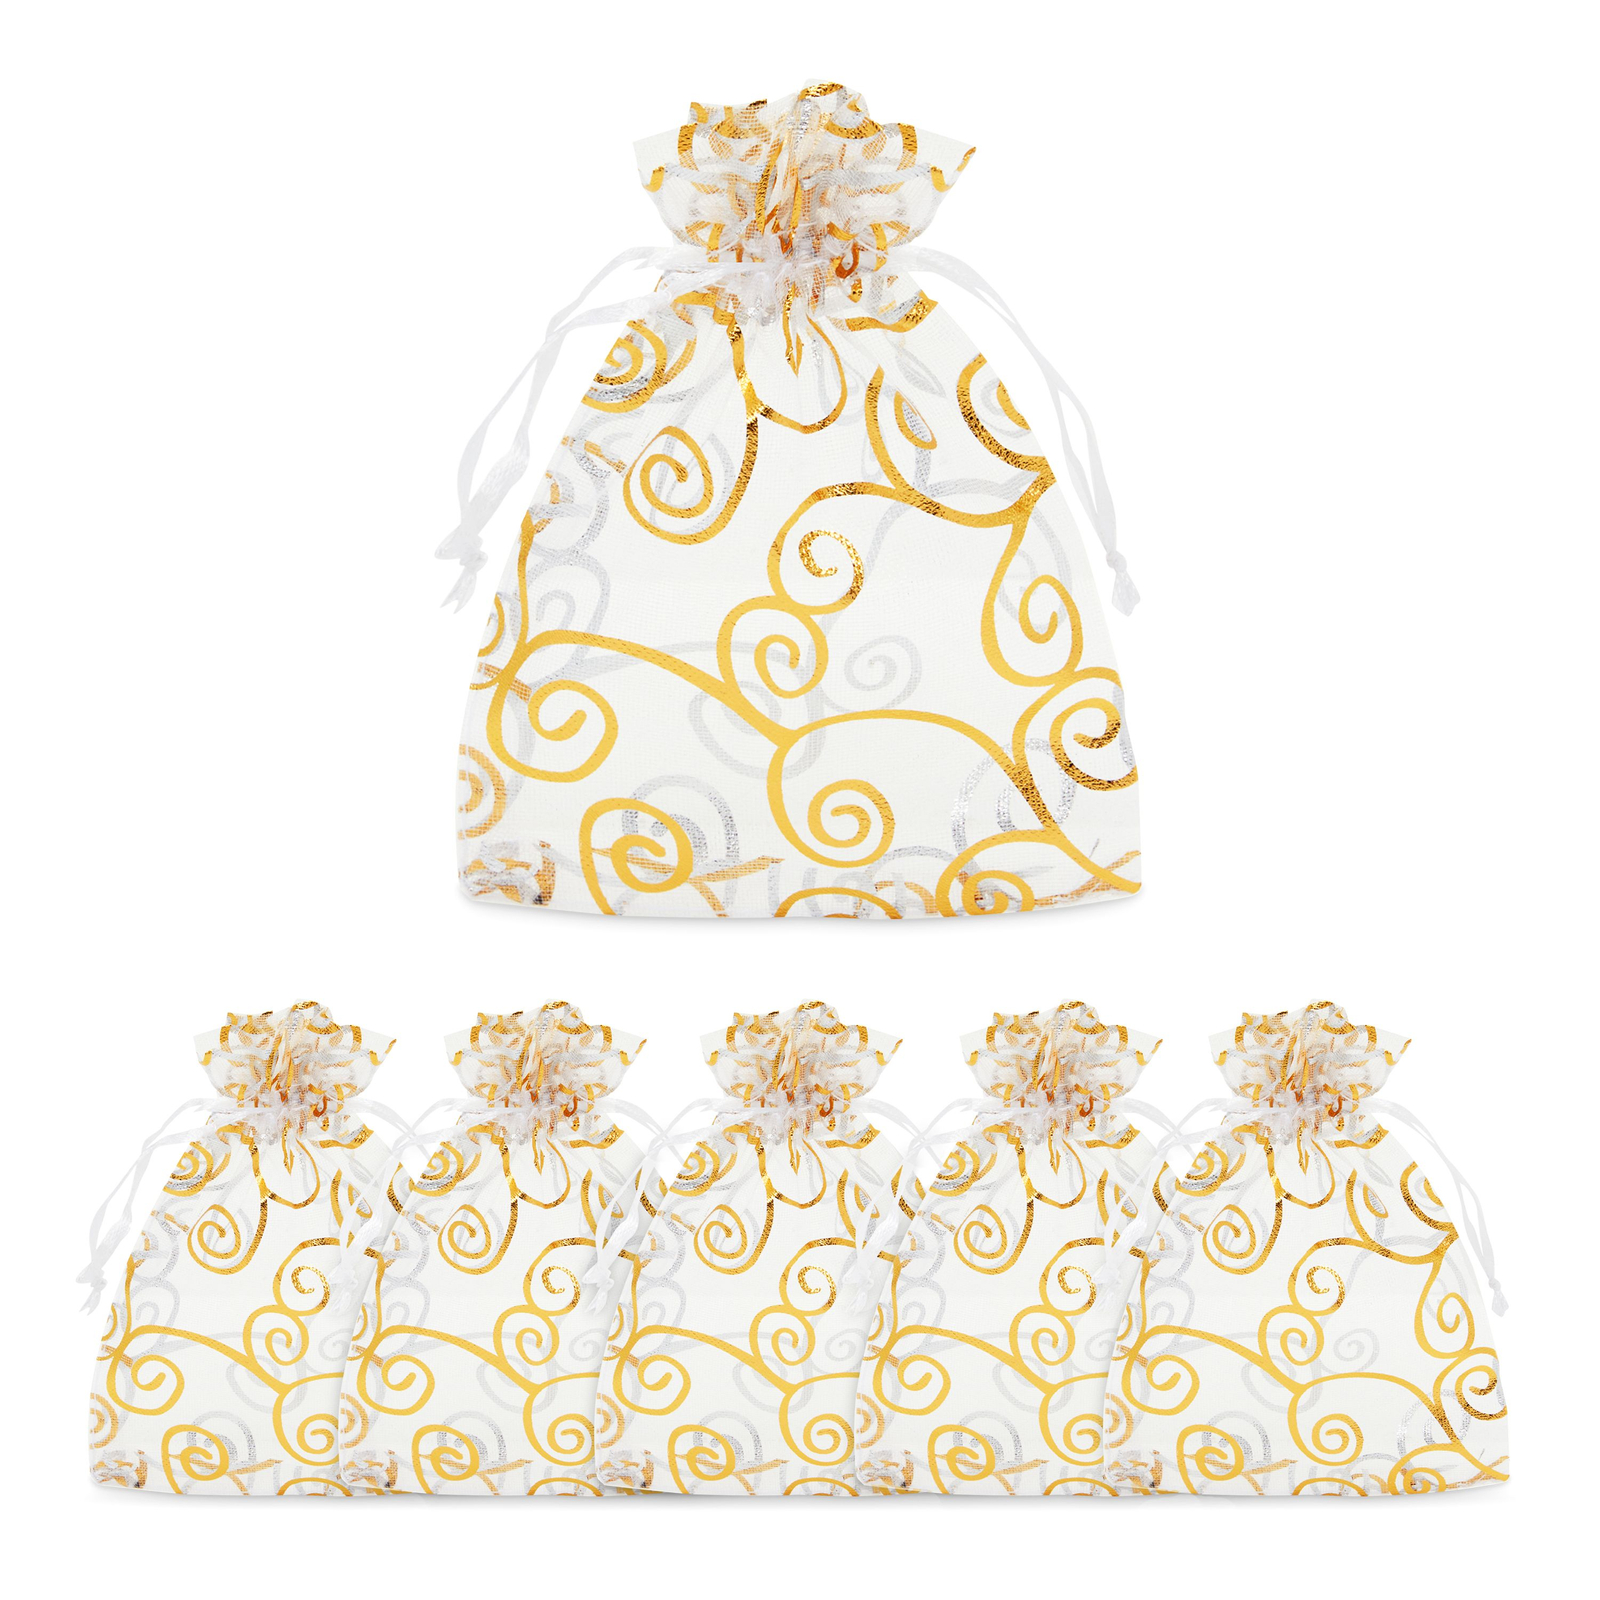 Organza Bags - 120-Count Satin Drawstring Organza Pouches with Gold Swirl Design, Mesh Favor Bags for Baby Showers, Wedding Gifts, Special Occasions, Party Favors, 3.5 x 4.75 inches - image 1 of 5